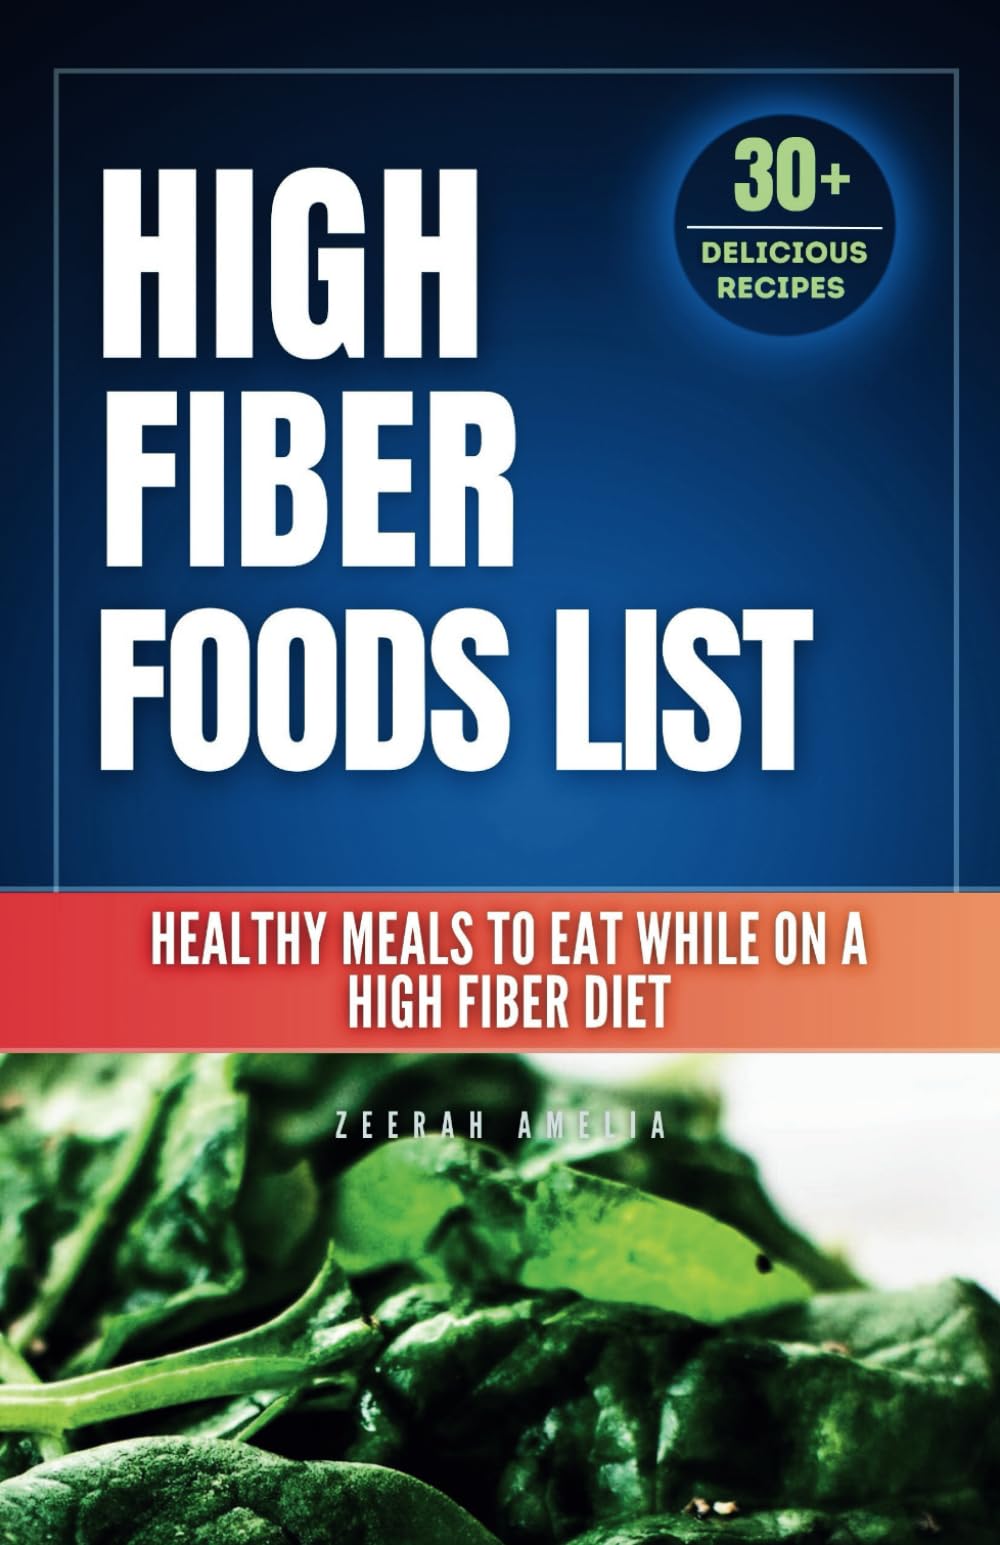 High Fiber Foods List: What to Eat While on a High Fiber Diet: A Comprehensive List of High Fiber Foods (Healthy Eating Cookbook)High Fiber Diet ... (Gi) & diabetic snacks & meals cookbook))